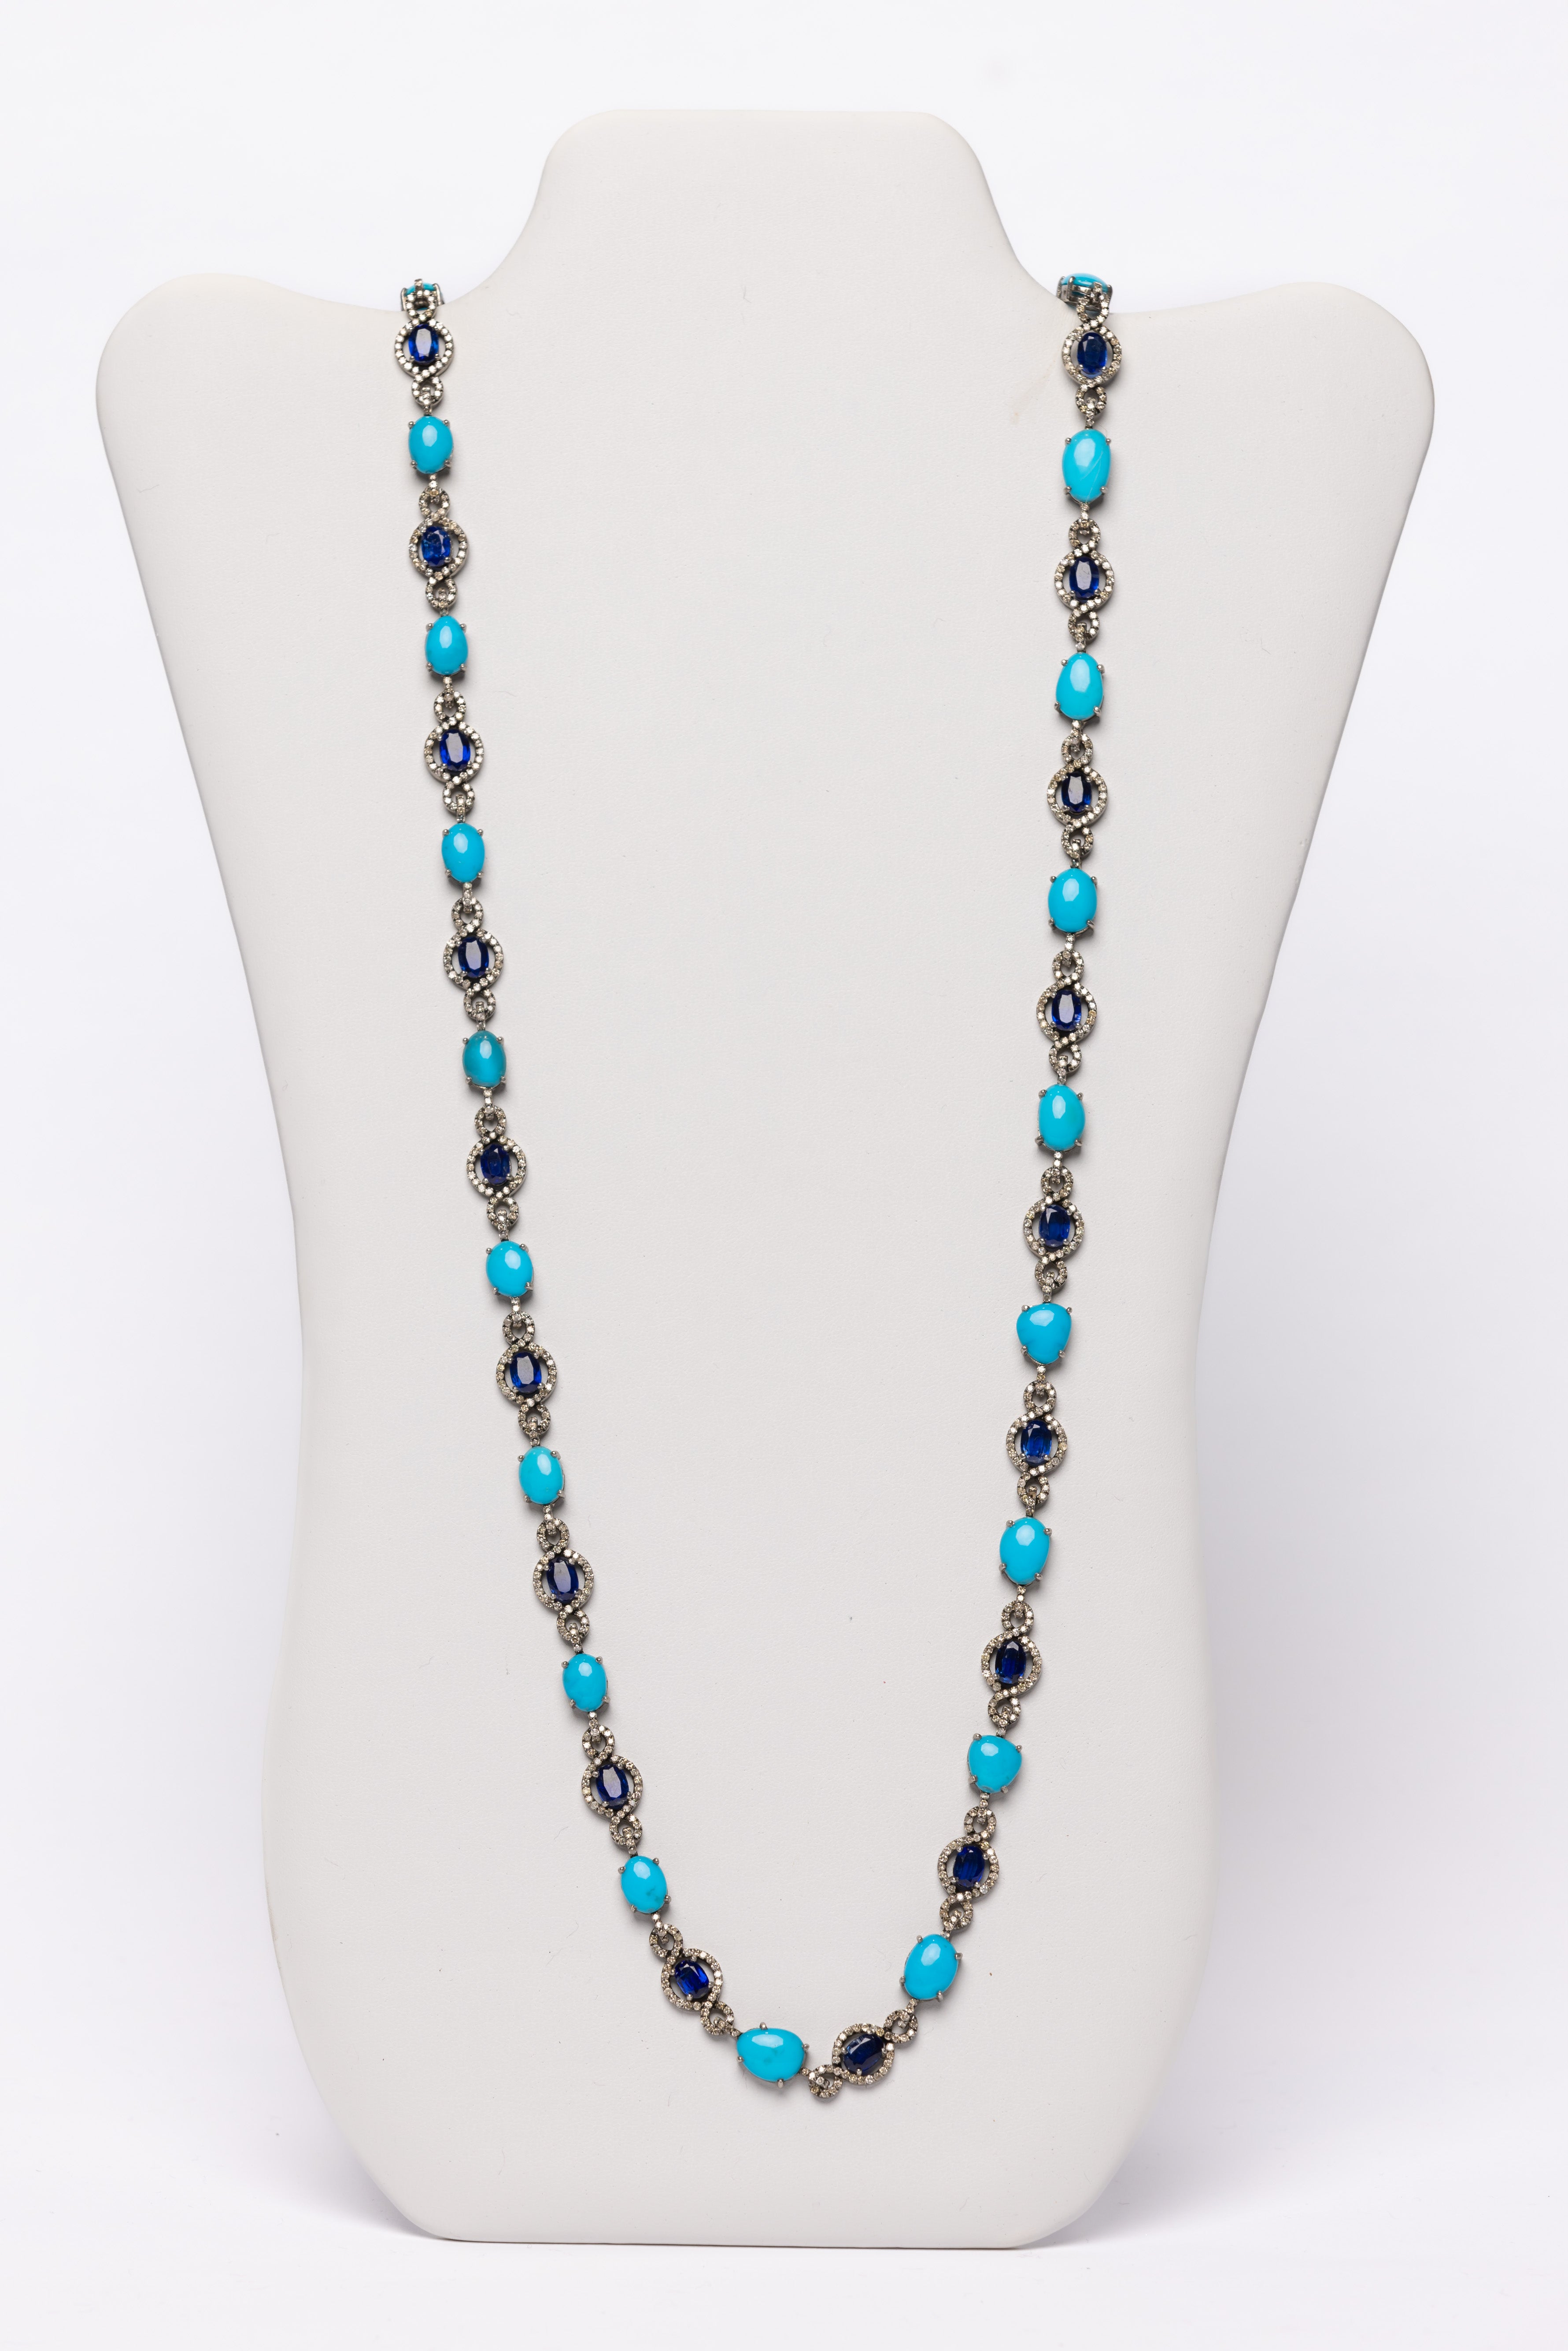 Diamond, Turquoise, Sapphire Long Link Necklace